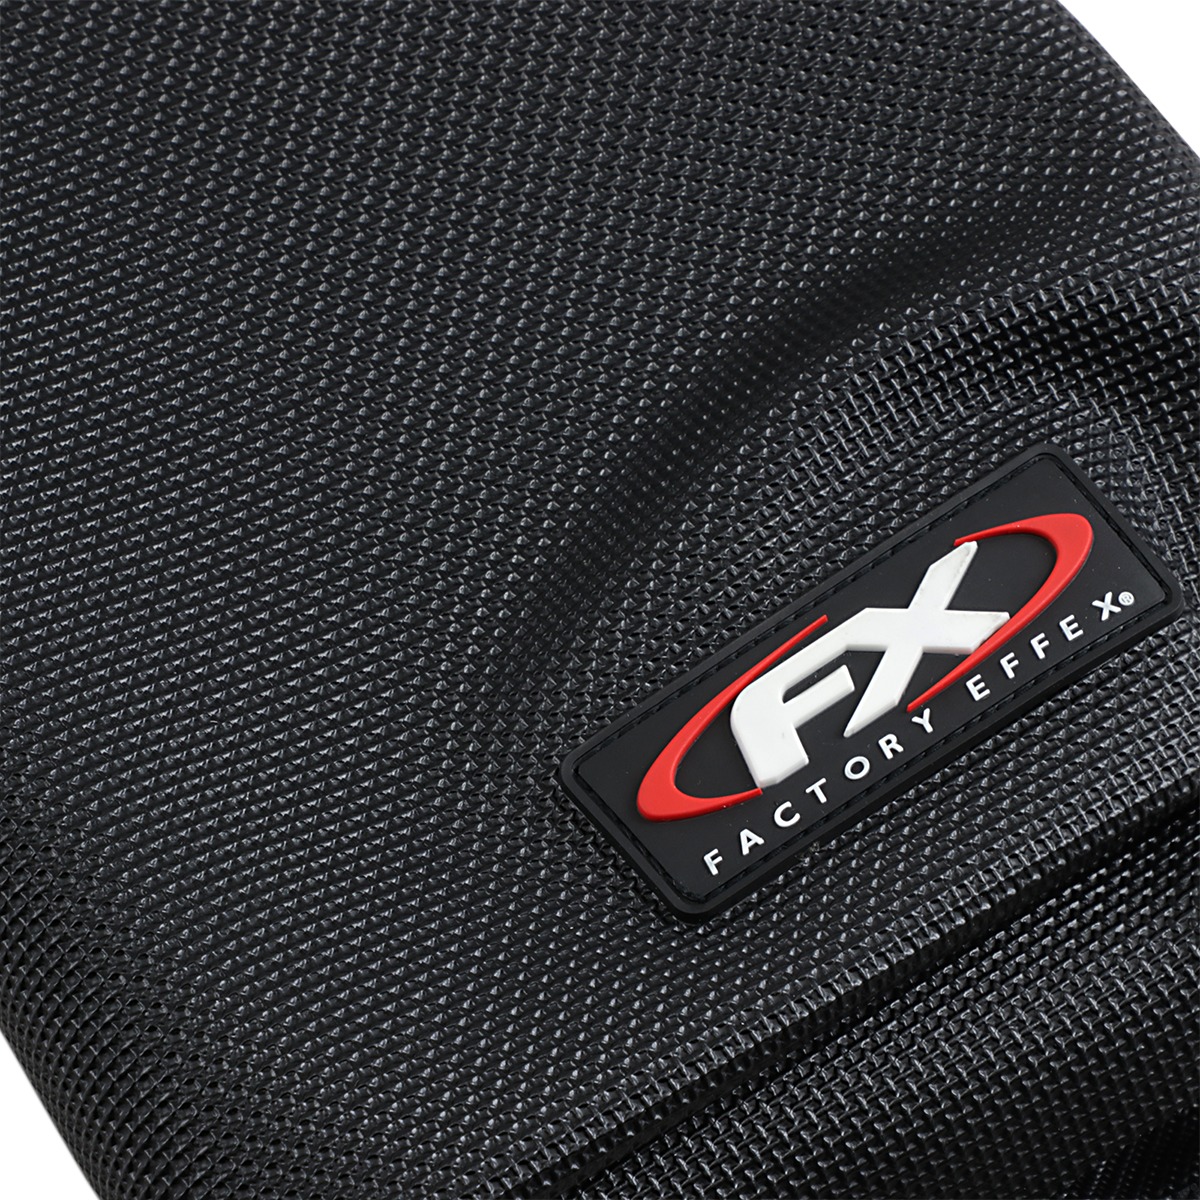 All-Grip Seat Cover ONLY - Click Image to Close